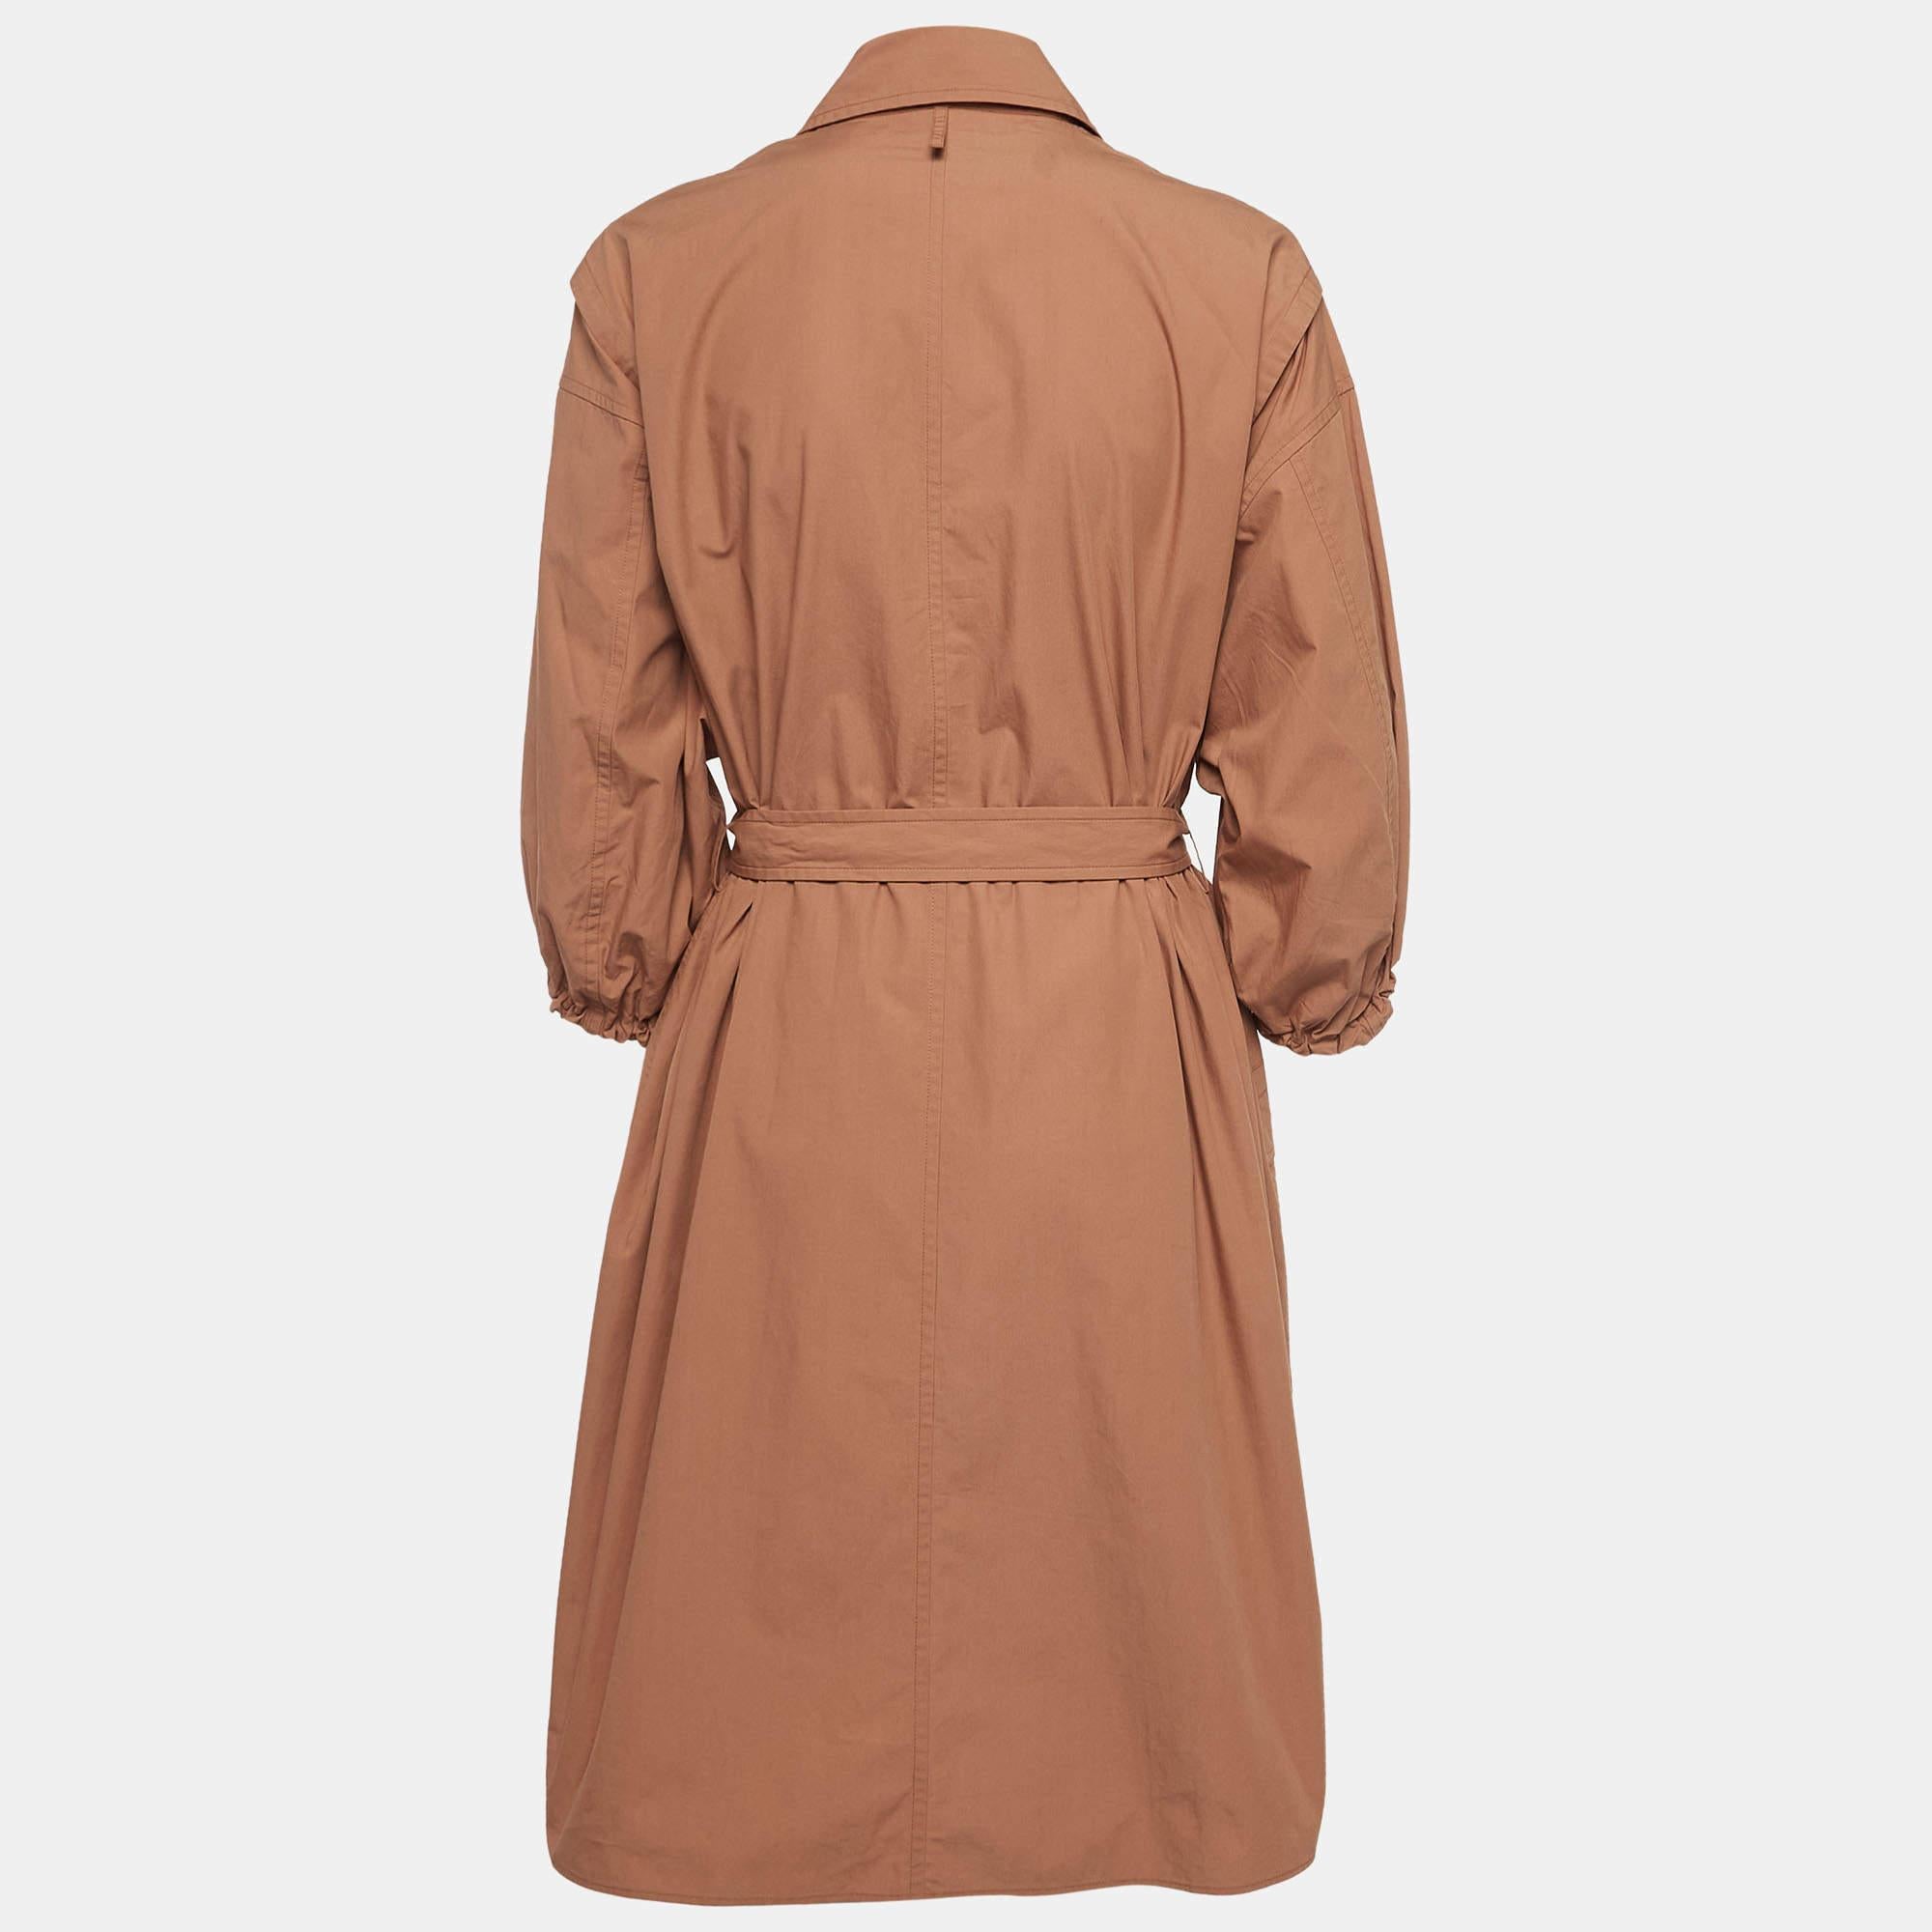 Discover the epitome of elegance with the Hermès dress. Crafted with exquisite attention to detail, this dress embodies refined simplicity. The light brown hue exudes warmth, while the belted waist accentuates your silhouette with grace. Elevate